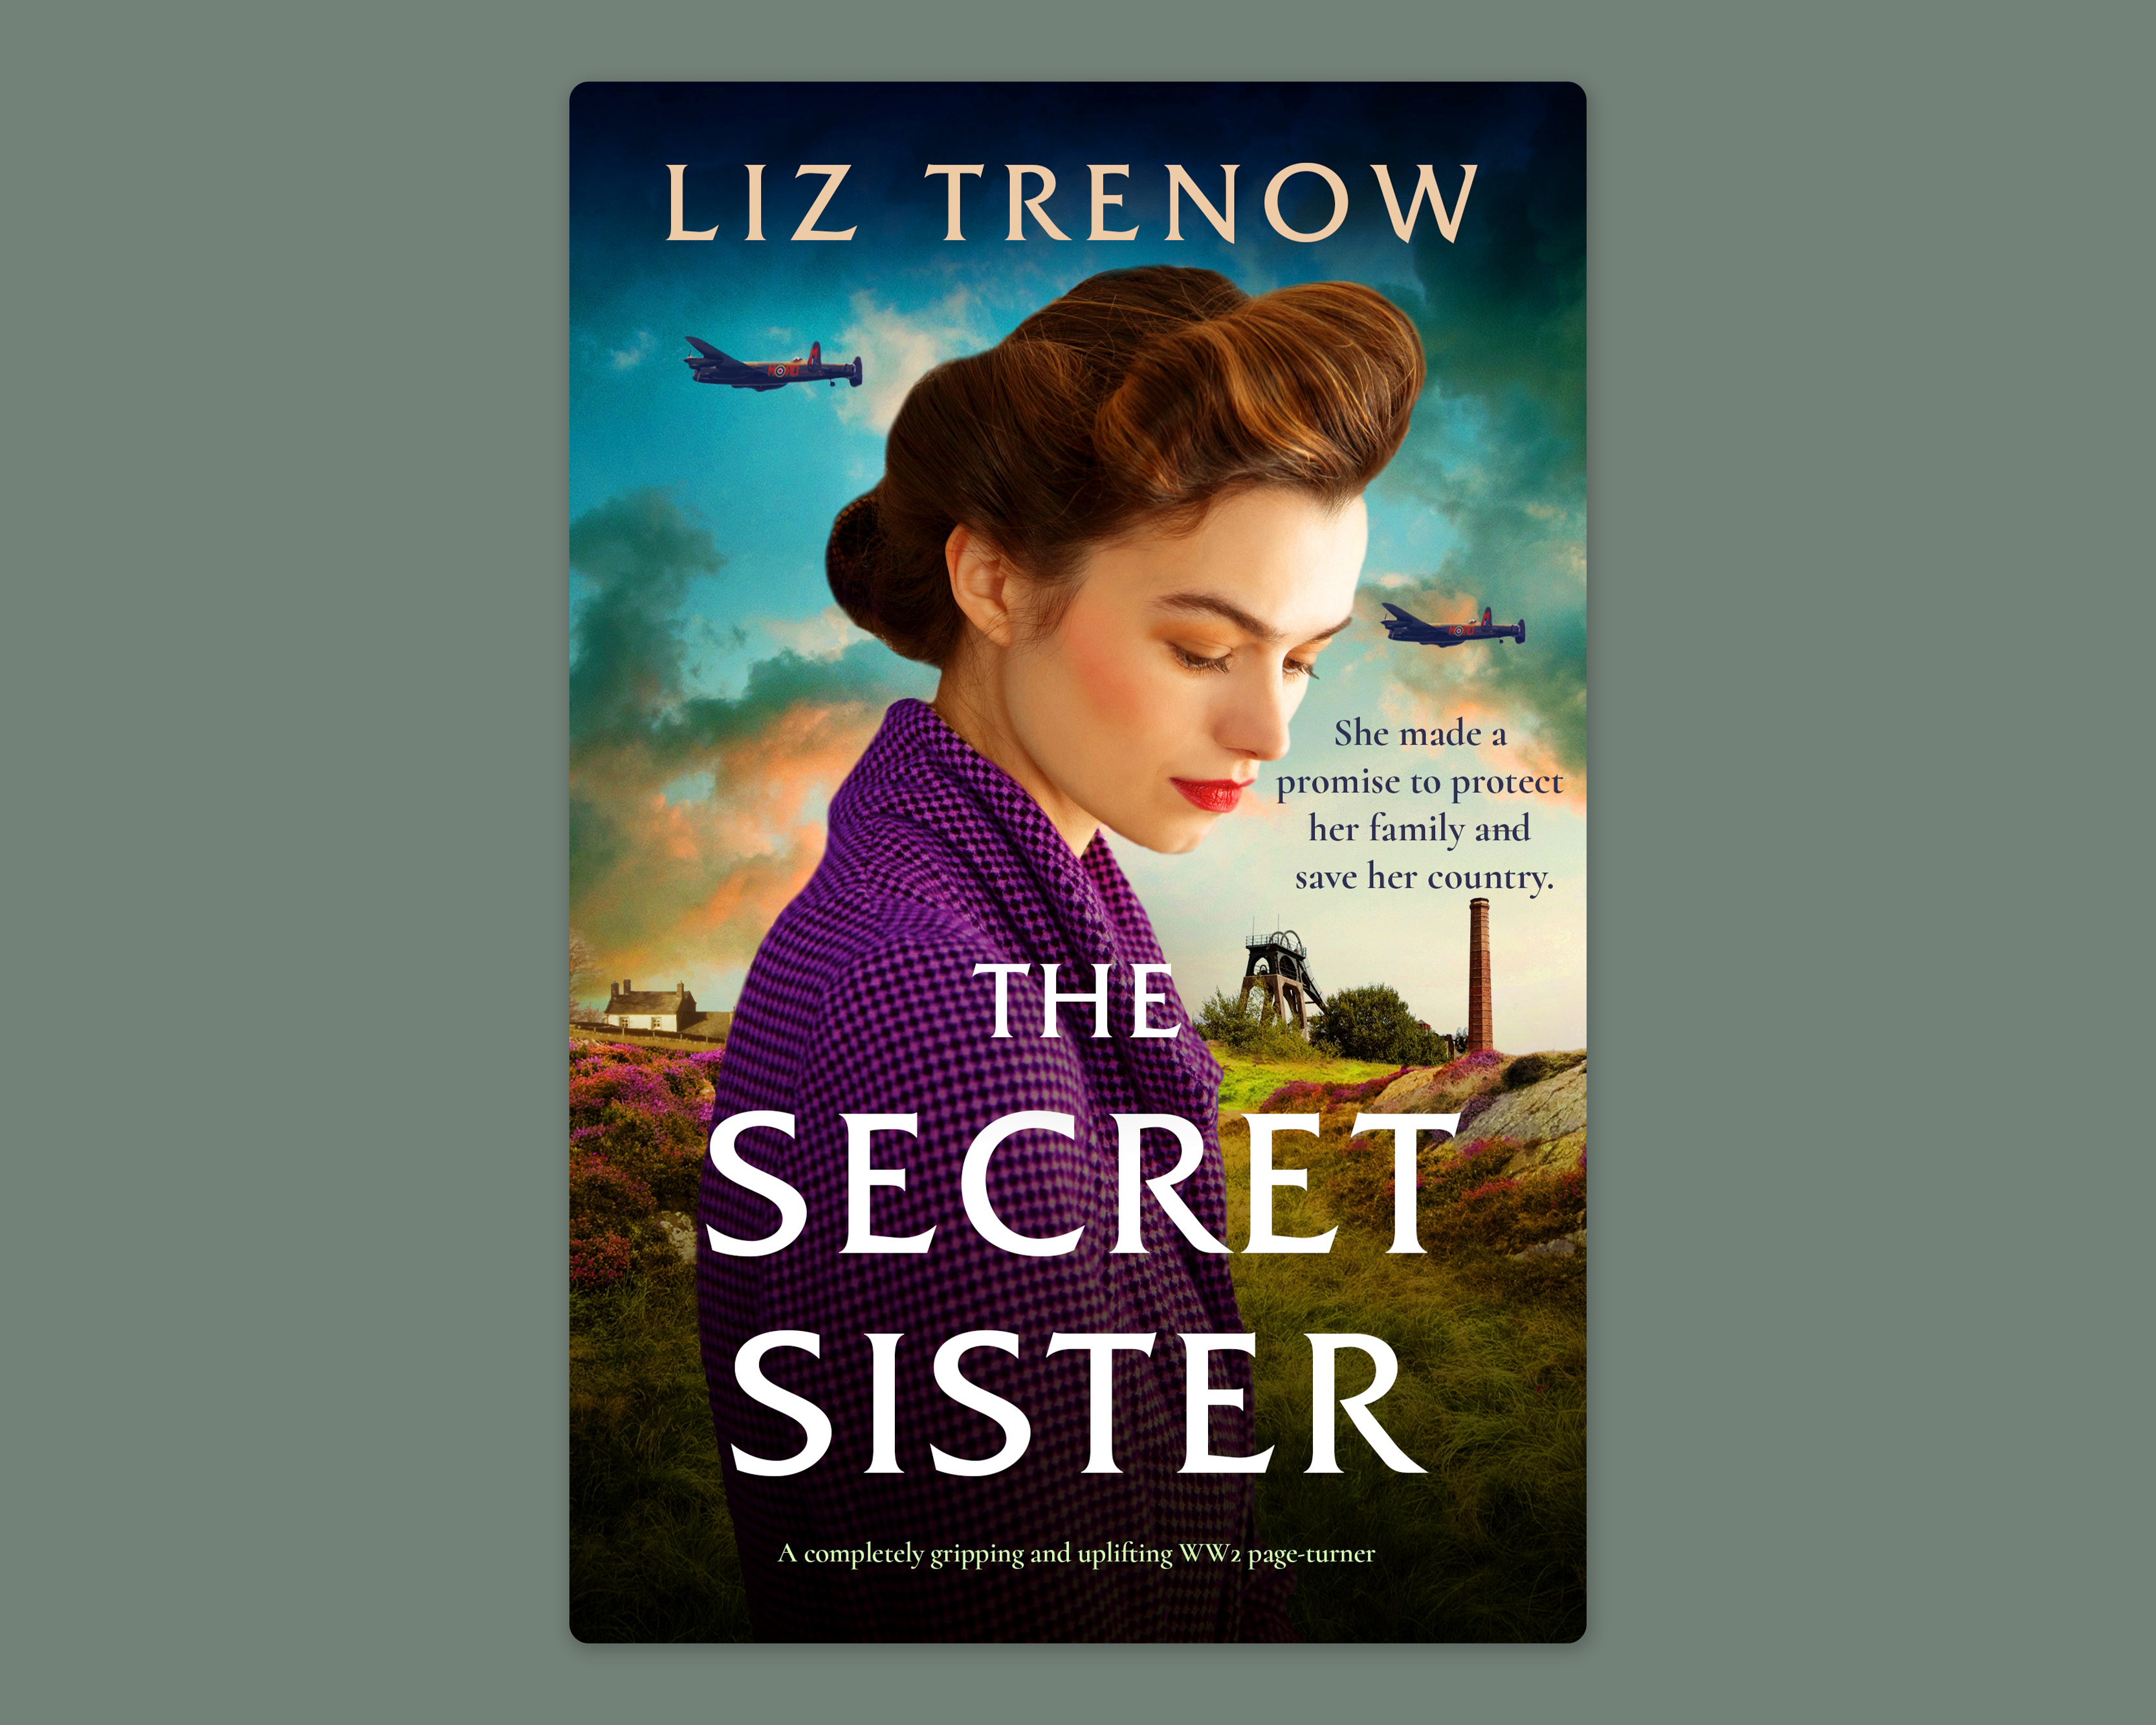 An image of the book cover The Secret Sister by Liz Trenow. The cover is overlayed on a green background.